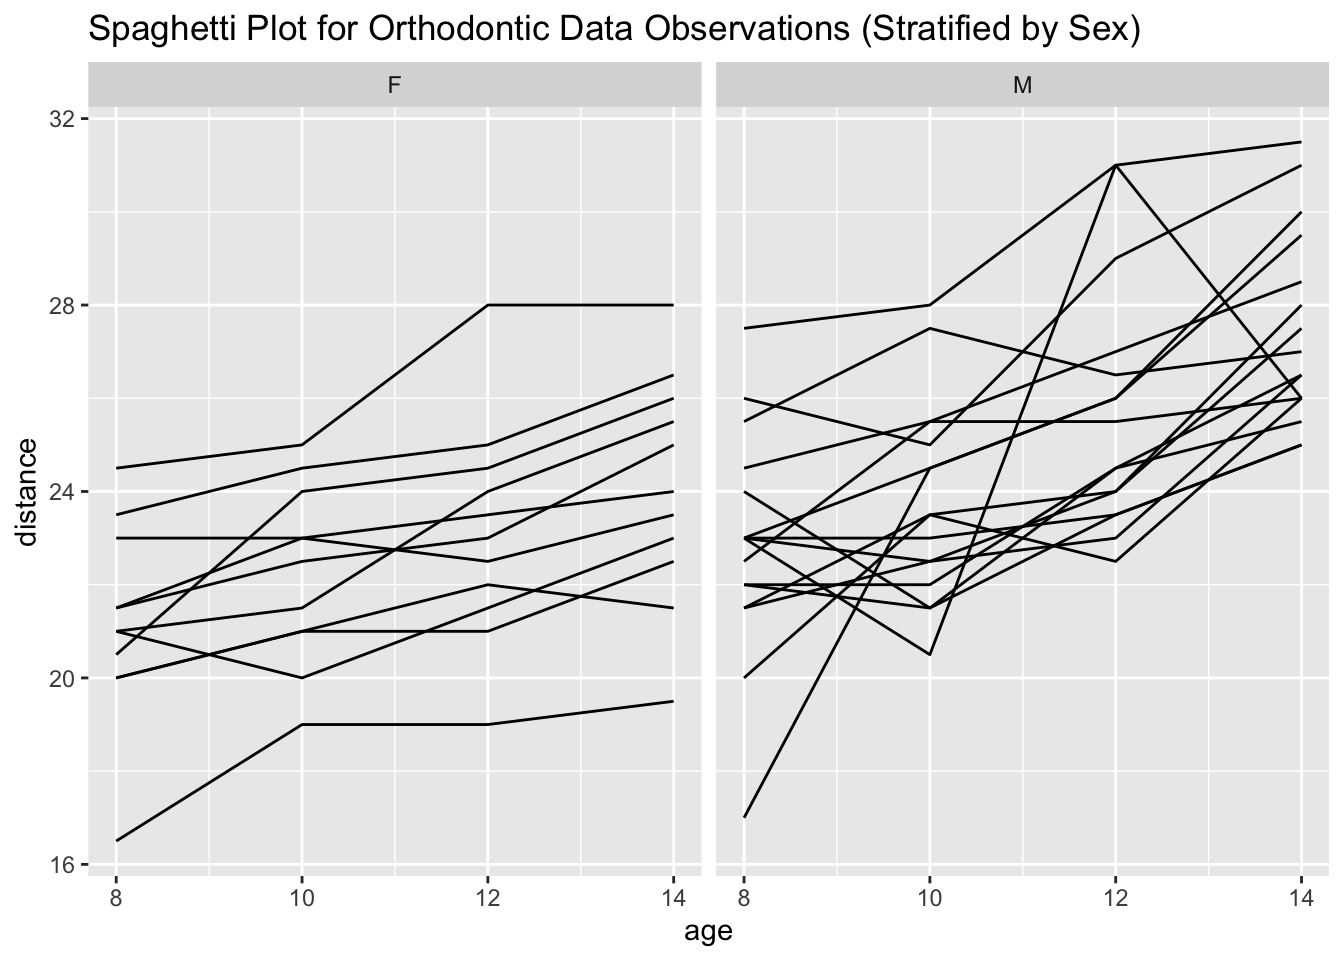 Plot of individual trajectories for the distance over time, stratified by sex.